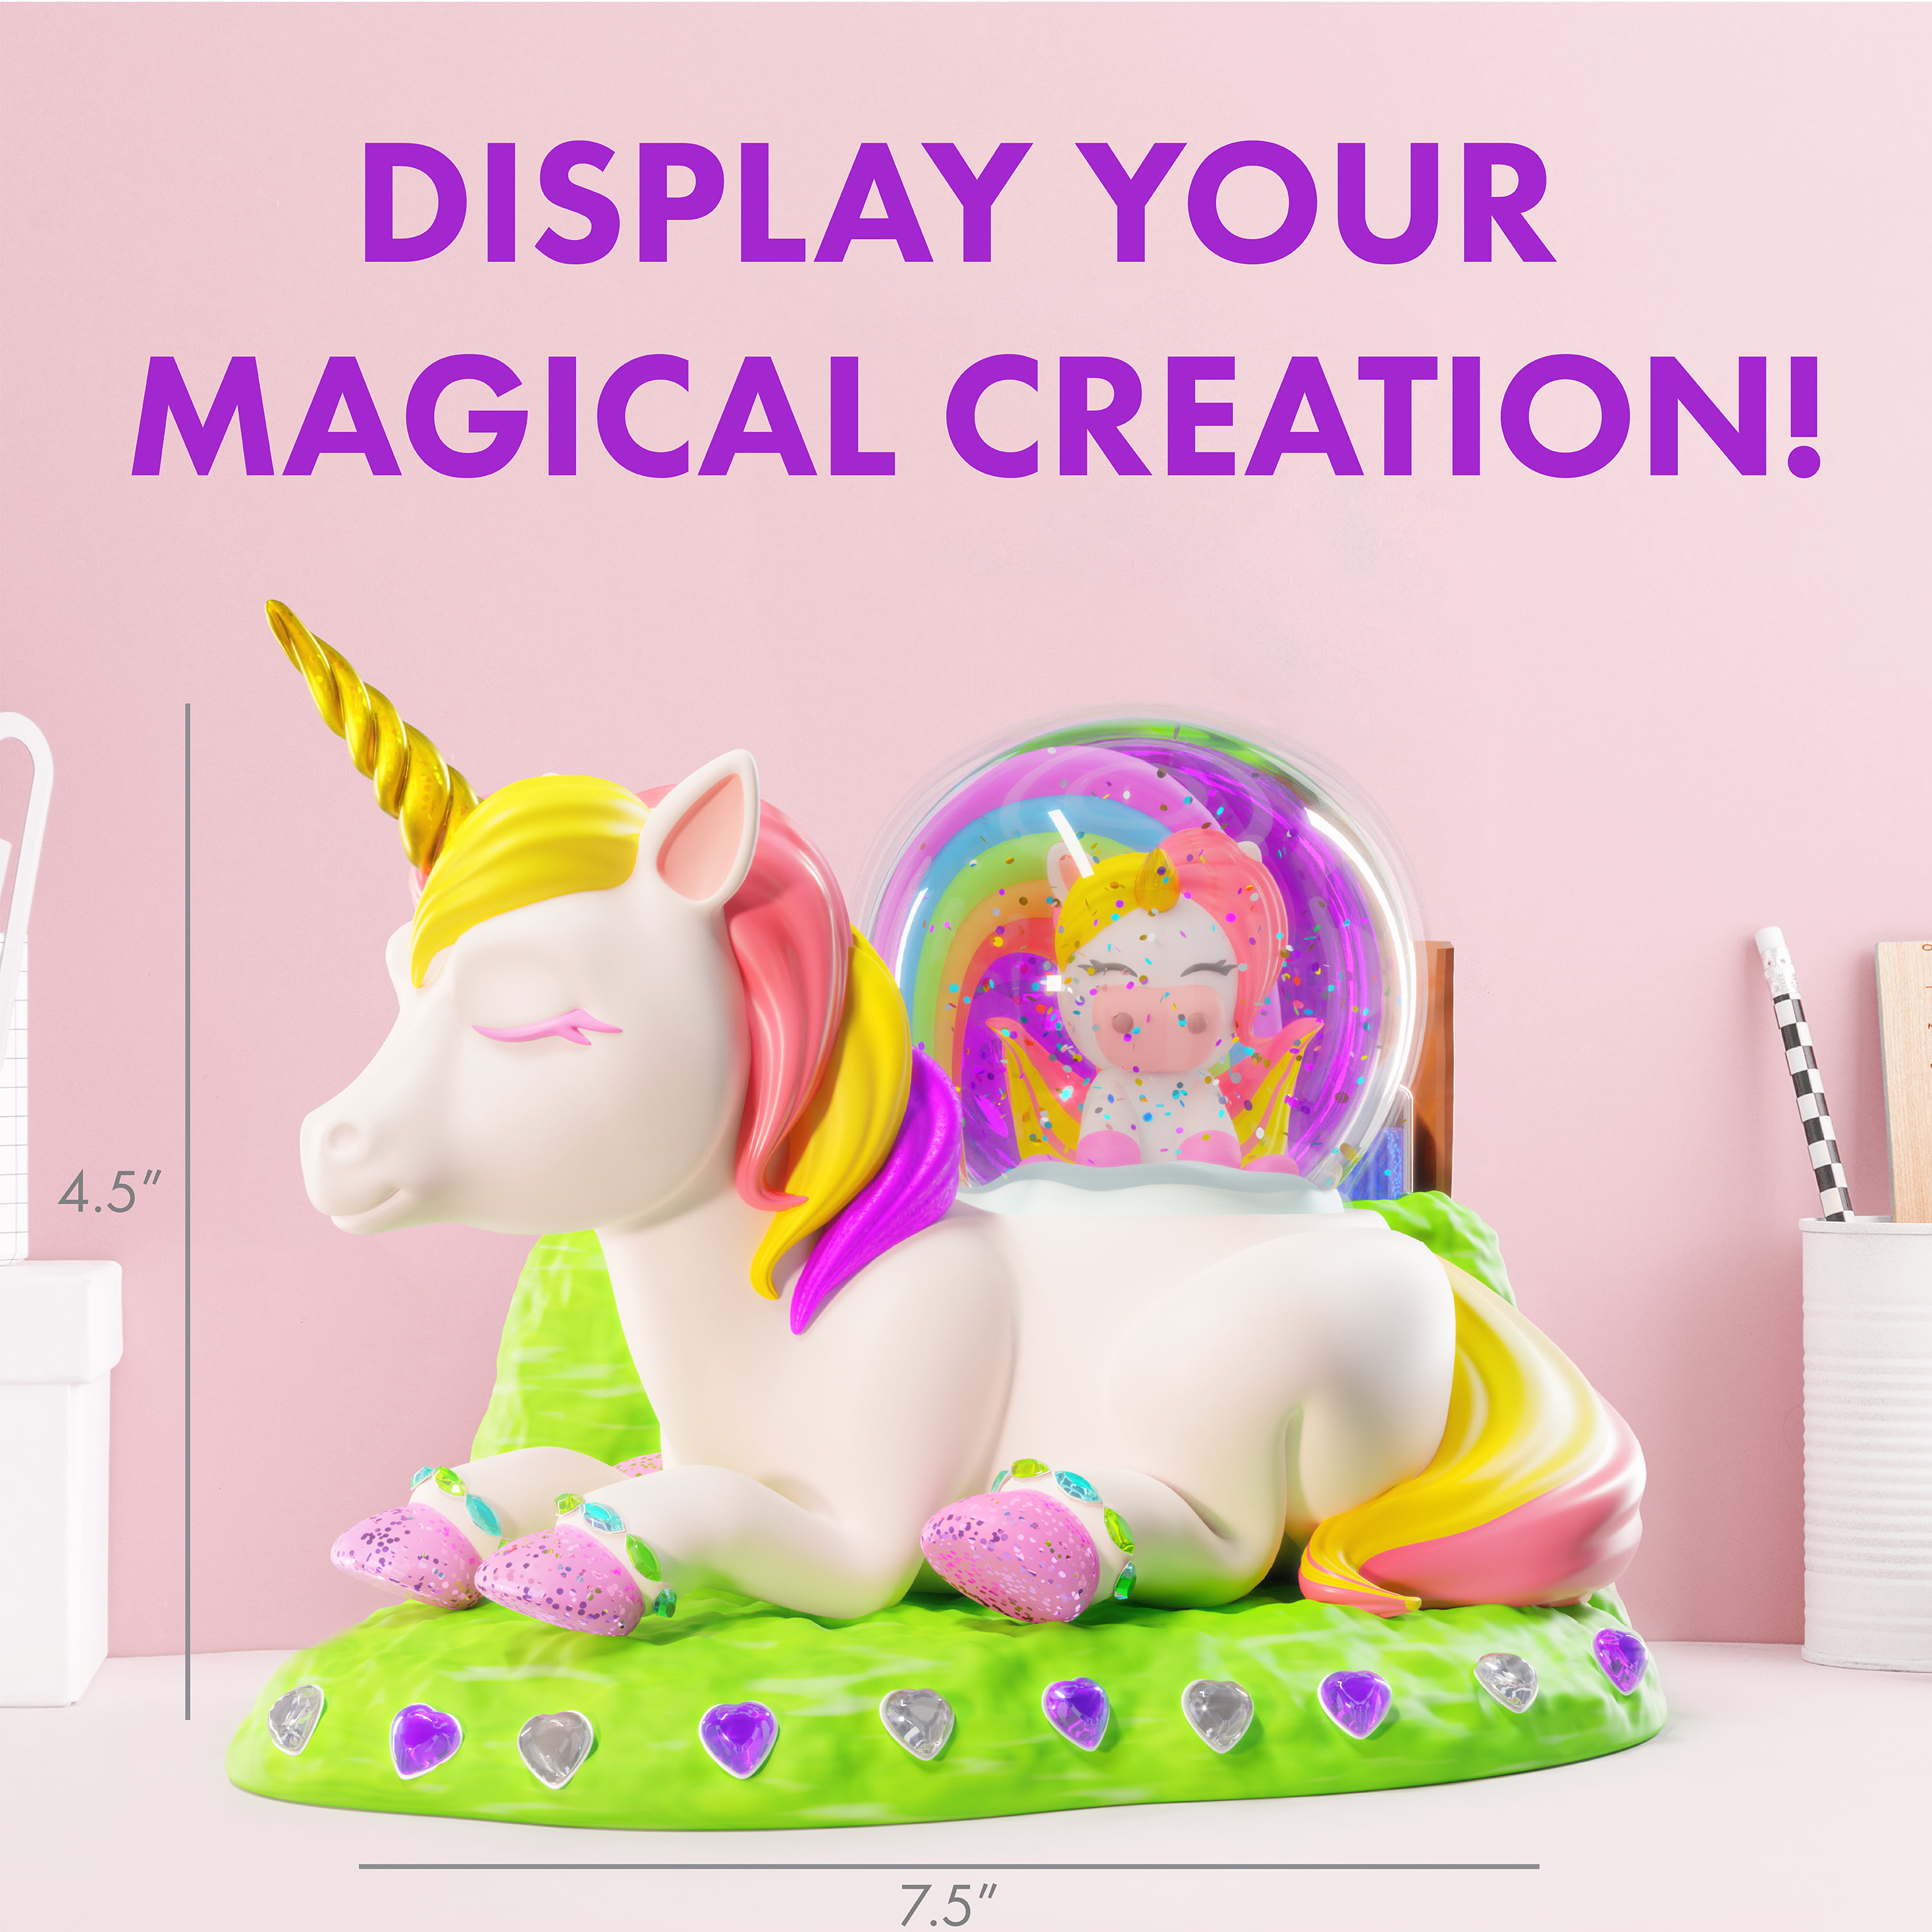 Paint Your Own Unicorn Painting Kit, 13 PCS Arts and Crafts Set for Kids,  STEAM Projects Creative Activity DIY Toys Gift for Boys & Girls Age 3+,  with 6 Figurines, 6 Paint